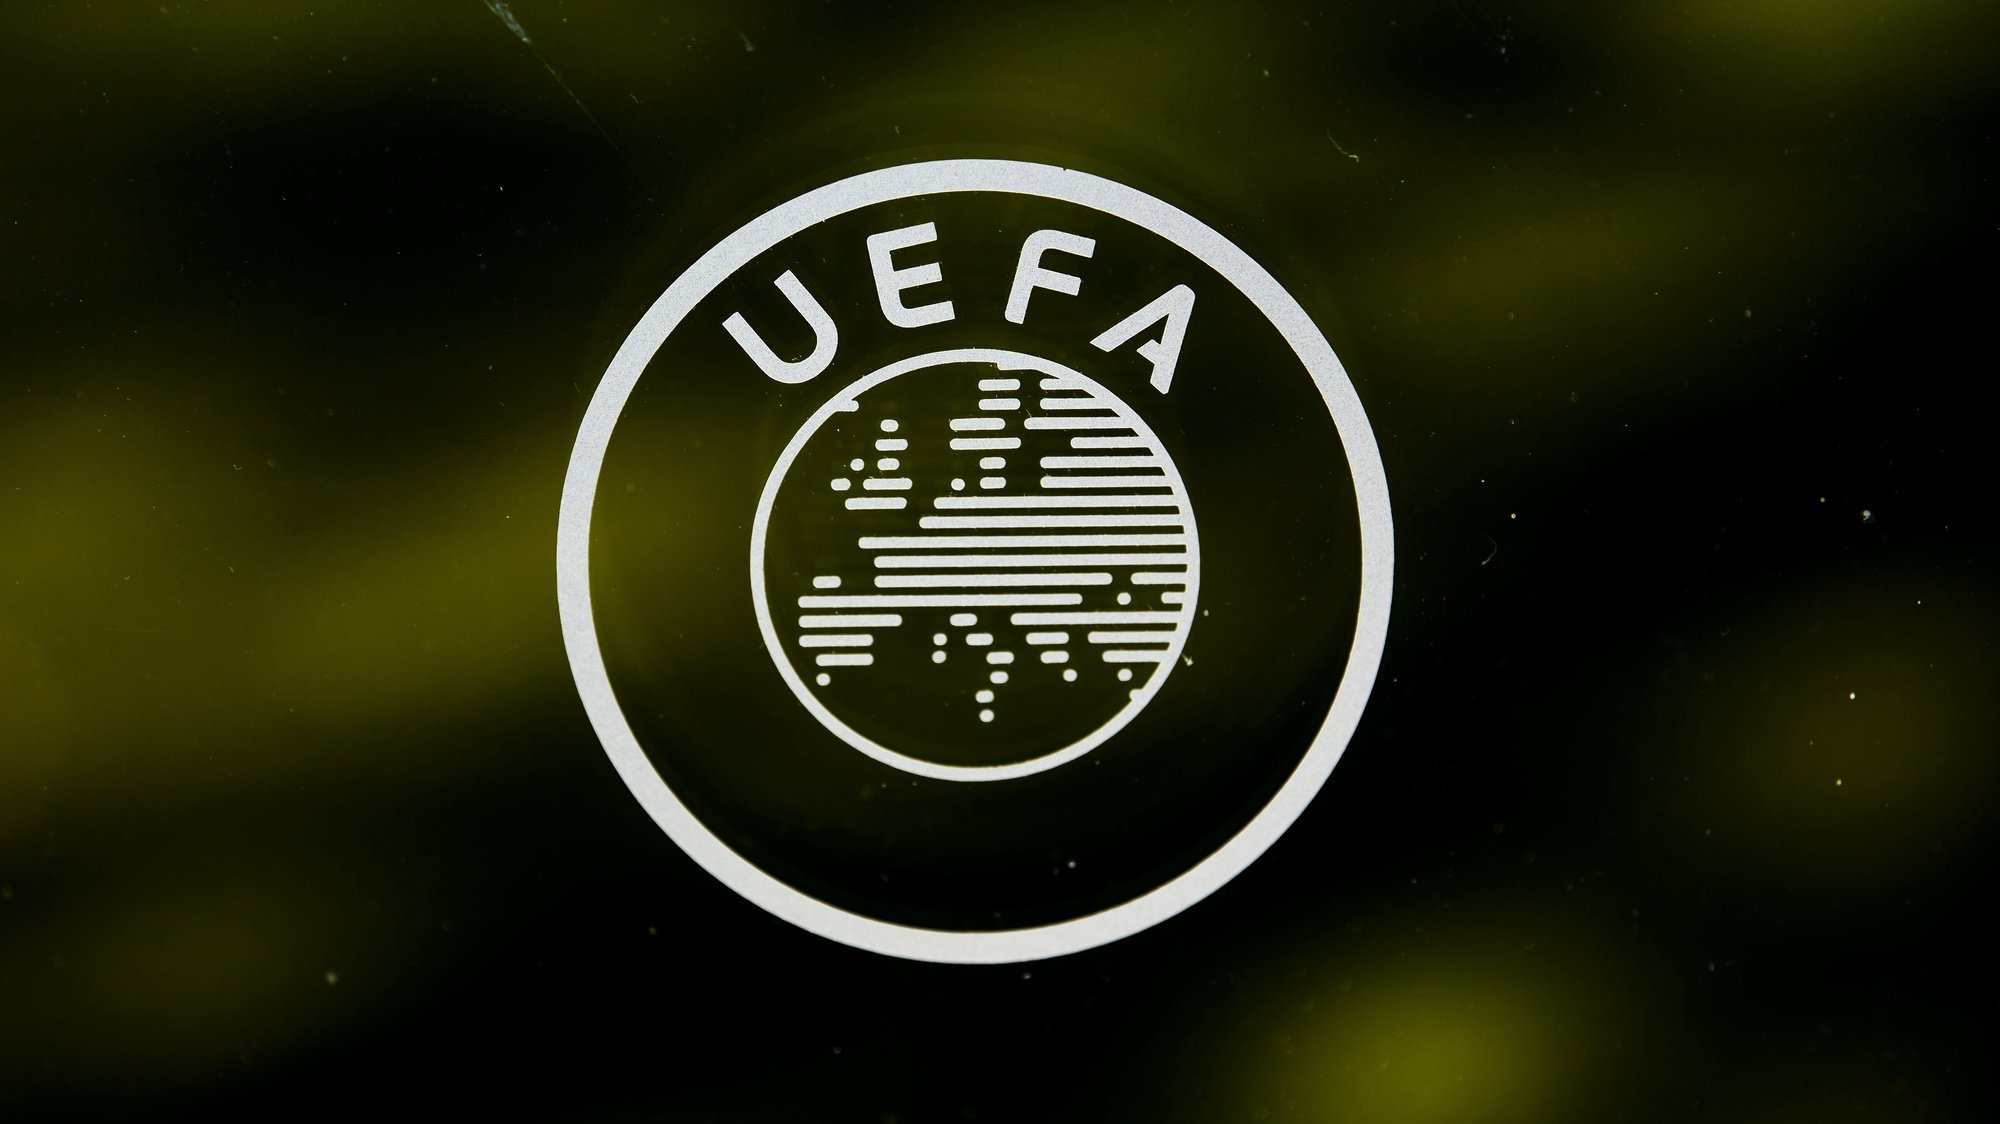 epa08289437 (FILE) - A UEFA logo is pictured through a window prior to the UEFA Europa League 2019/20 Round of 16 draw, at the UEFA Headquarters in Nyon, Switzerland, 28 February 2020 (re-issued 12 March 2020). The UEFA announced on their website on 12 March 2020 that they have invited representatives of its 55 member associations, together with the boards of the European Club Association and the European Leagues and a representative of FIFPro, to attend meetings by videoconference on Tuesday 17 March to discuss European football&#039;s response to the coronavirus outbreak.  EPA/JEAN-CHRISTOPHE BOTT *** Local Caption *** 55912791